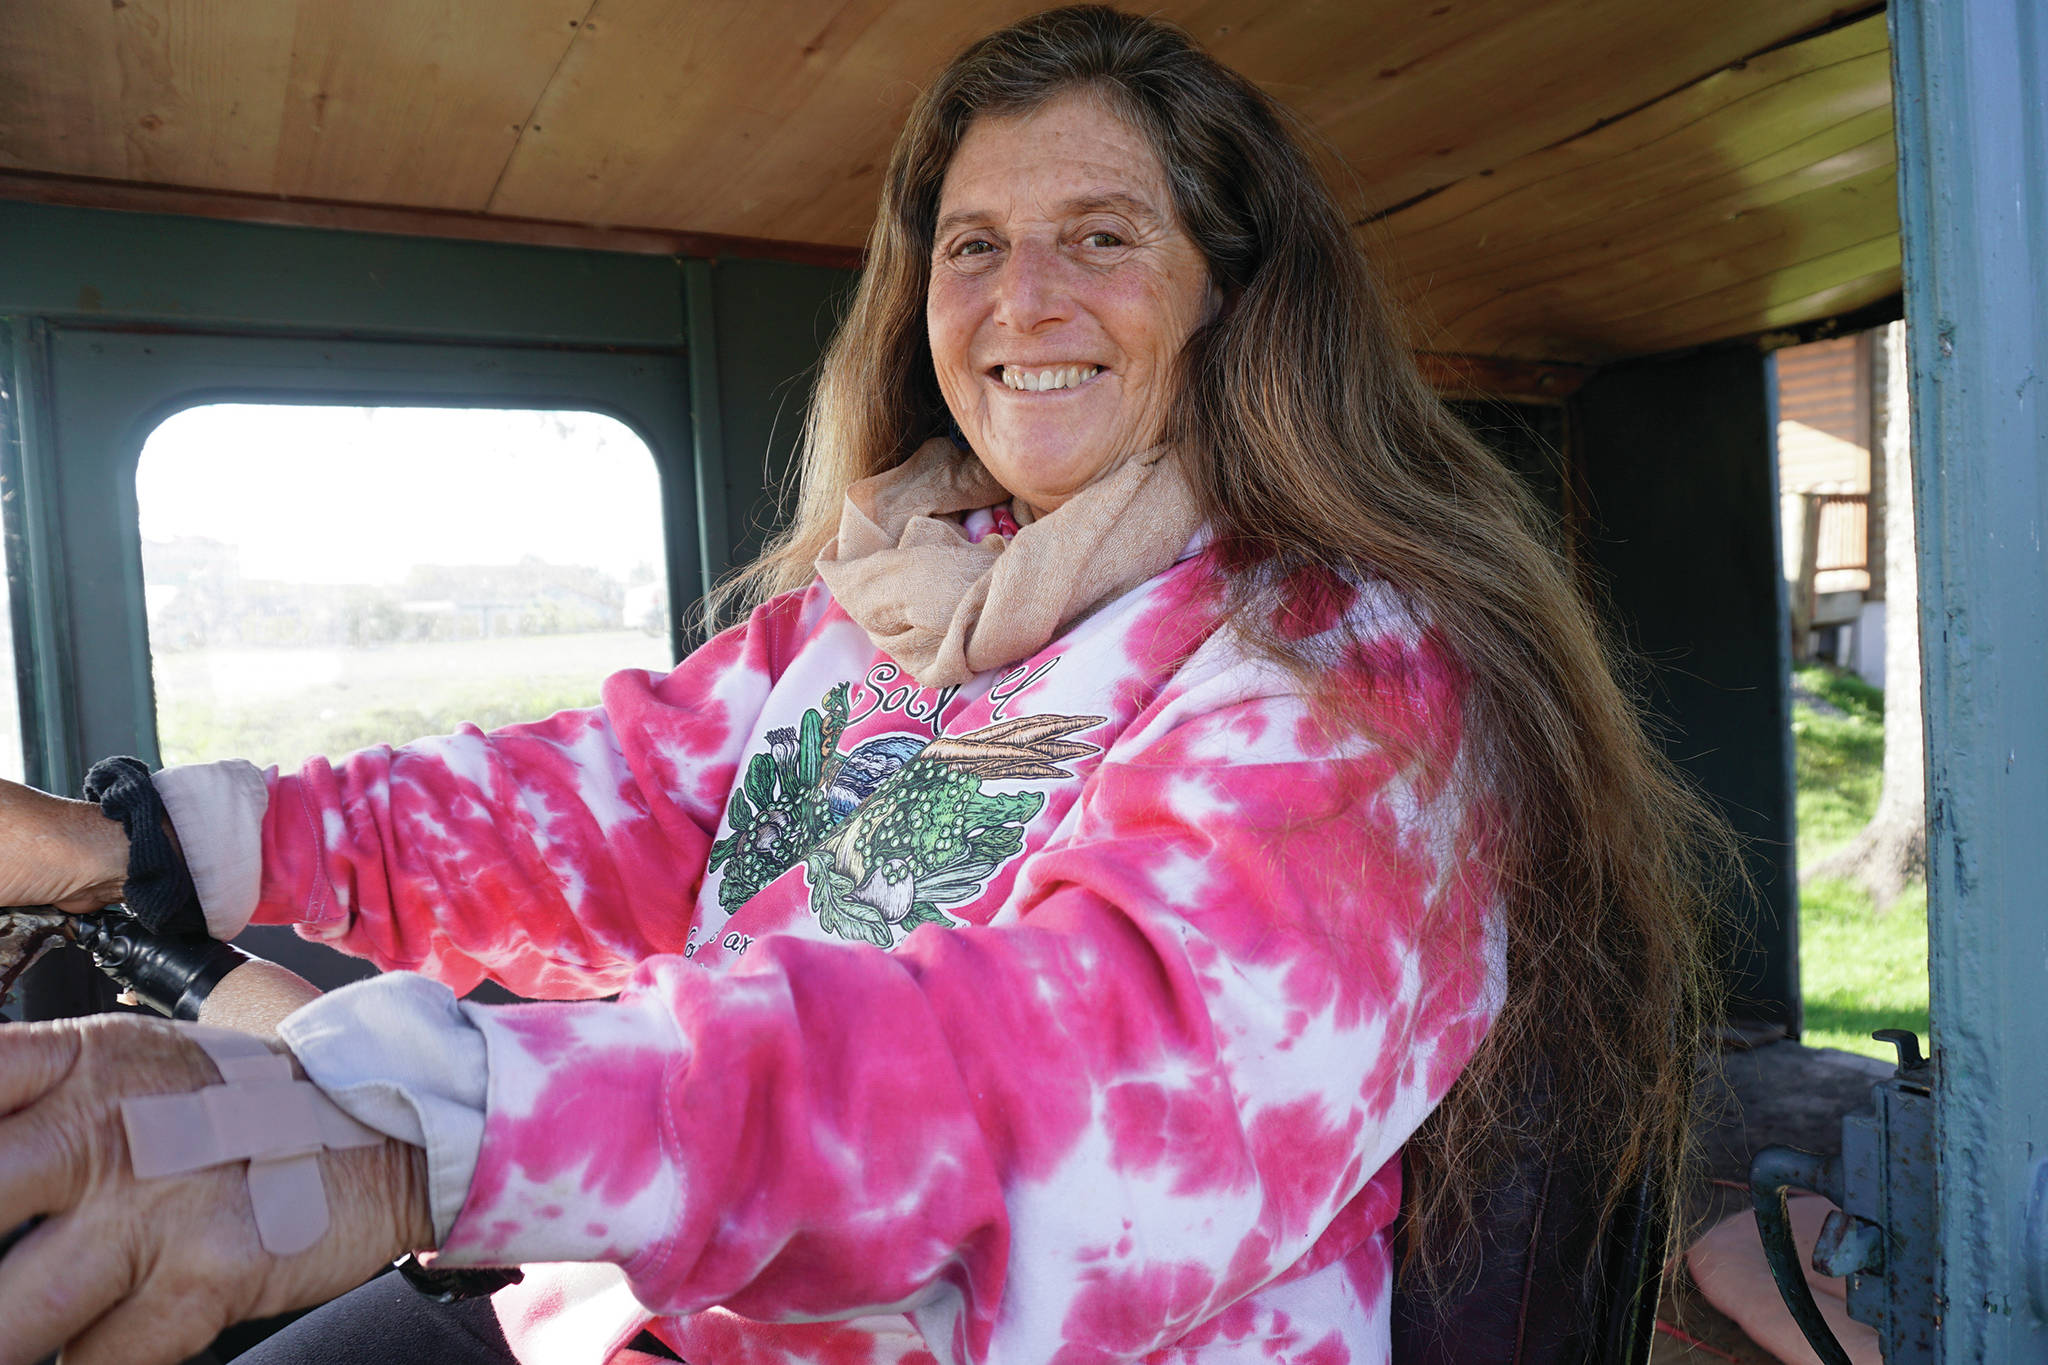 Donna Maltz poses in the original Fresh Sourdough Express Bakery and Cafe van on Sept. 27, 2019, as the landmark business held a going-out-of-business garage sale at its Ocean Drive location in Homer, Alaska. (Photo by Michael Armstrong/Homer News)